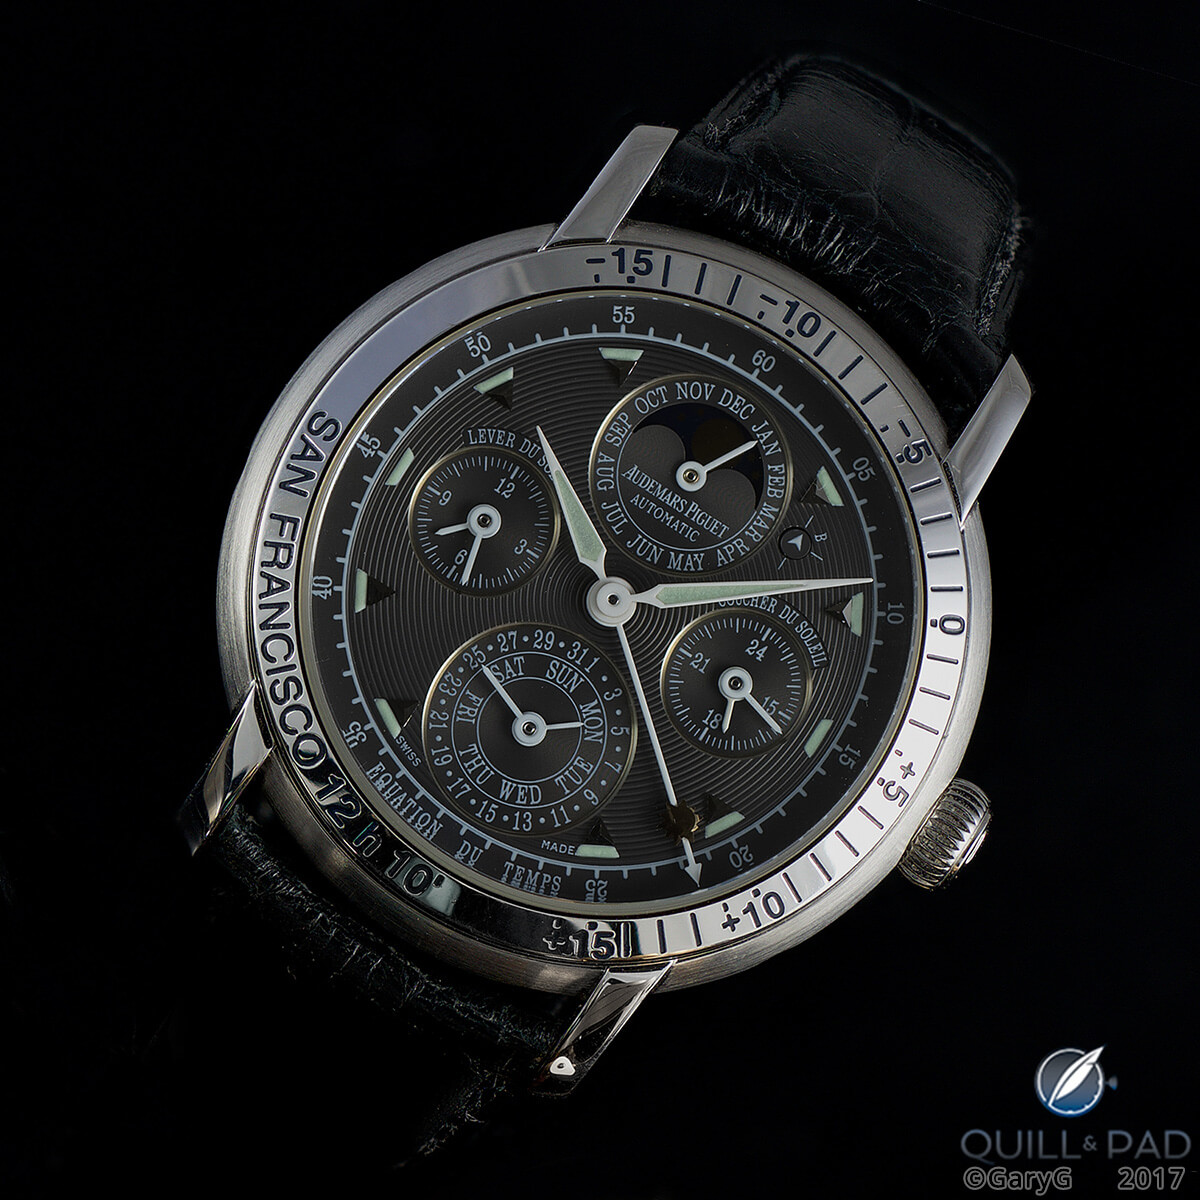 And thin, too: Jules Audemars Equation of Time based on Caliber 2120